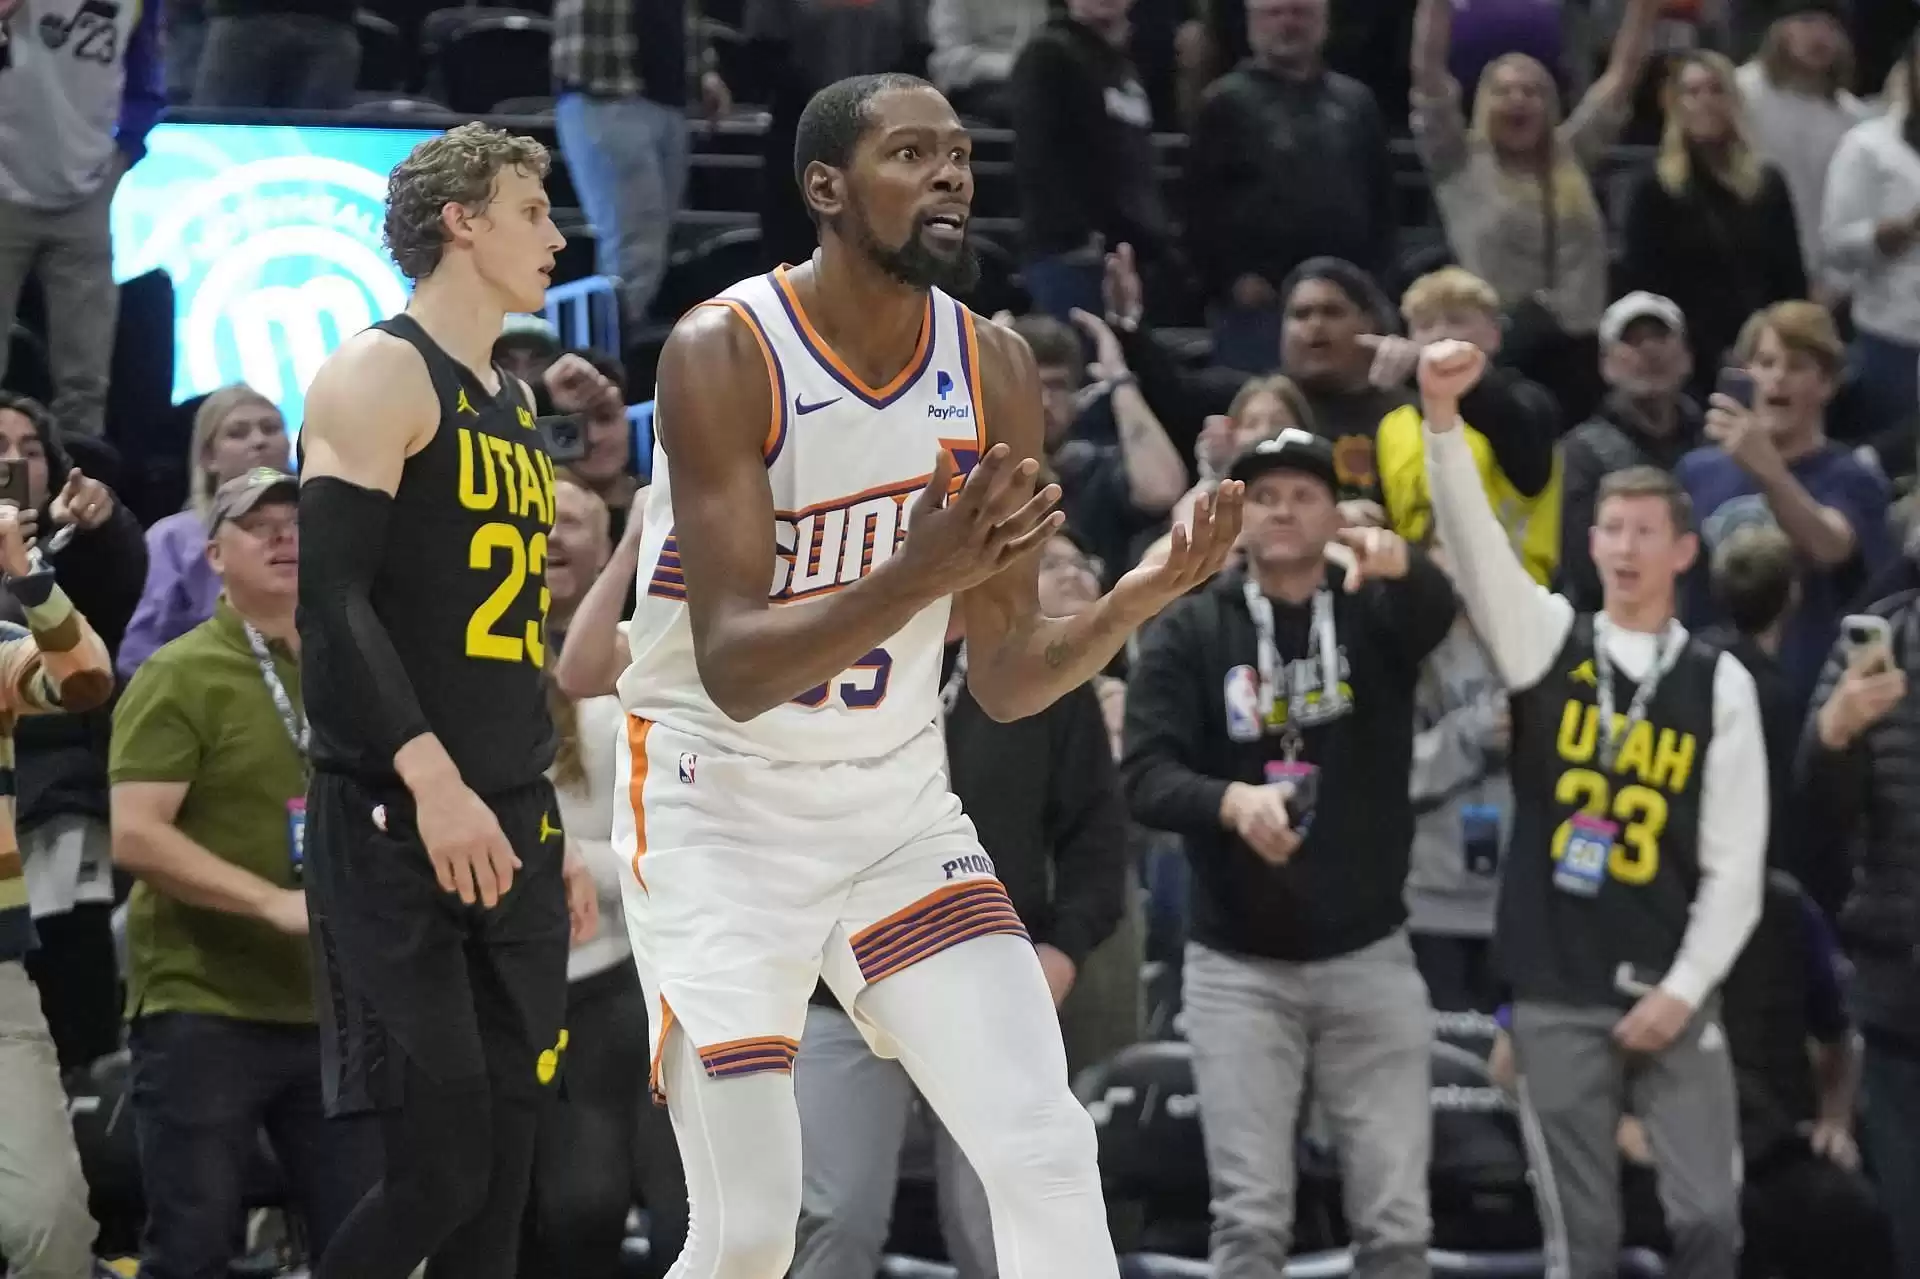 Kevin Durant calls out bettors who curse him by saying "Send a small percentage to my cashapp"